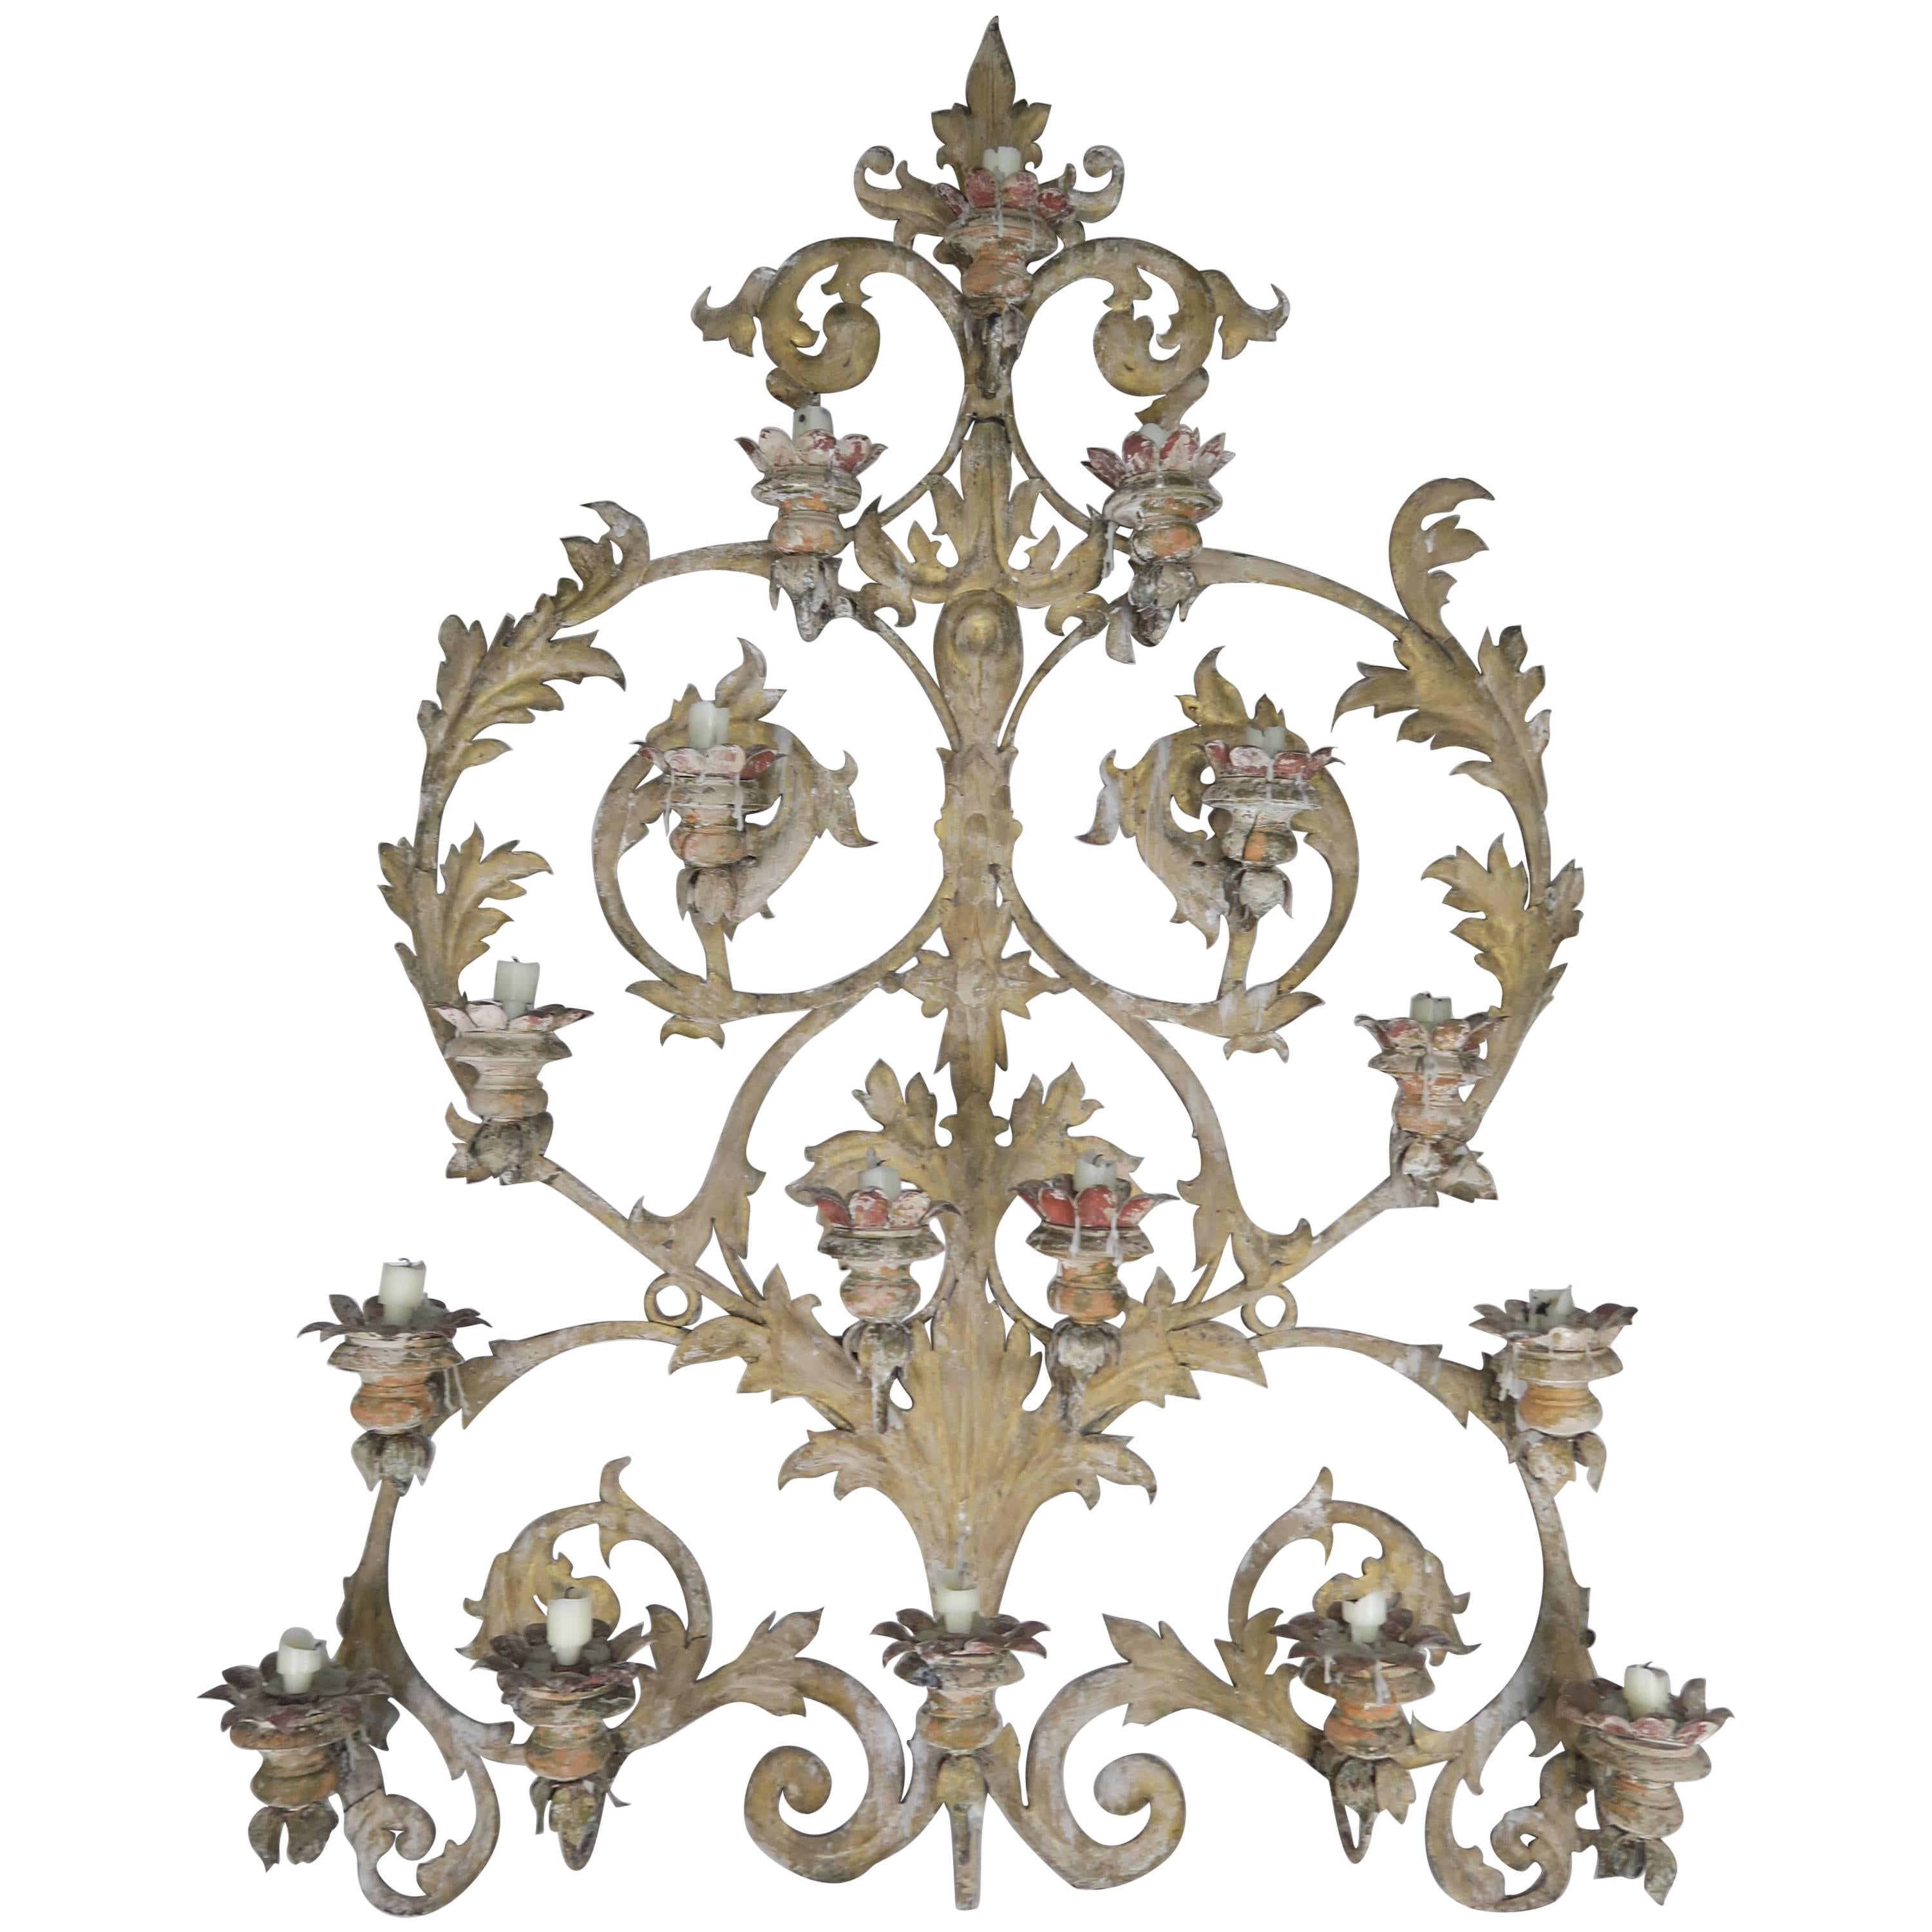 19th Century Italian 16-Light Wall Ornament for Candles